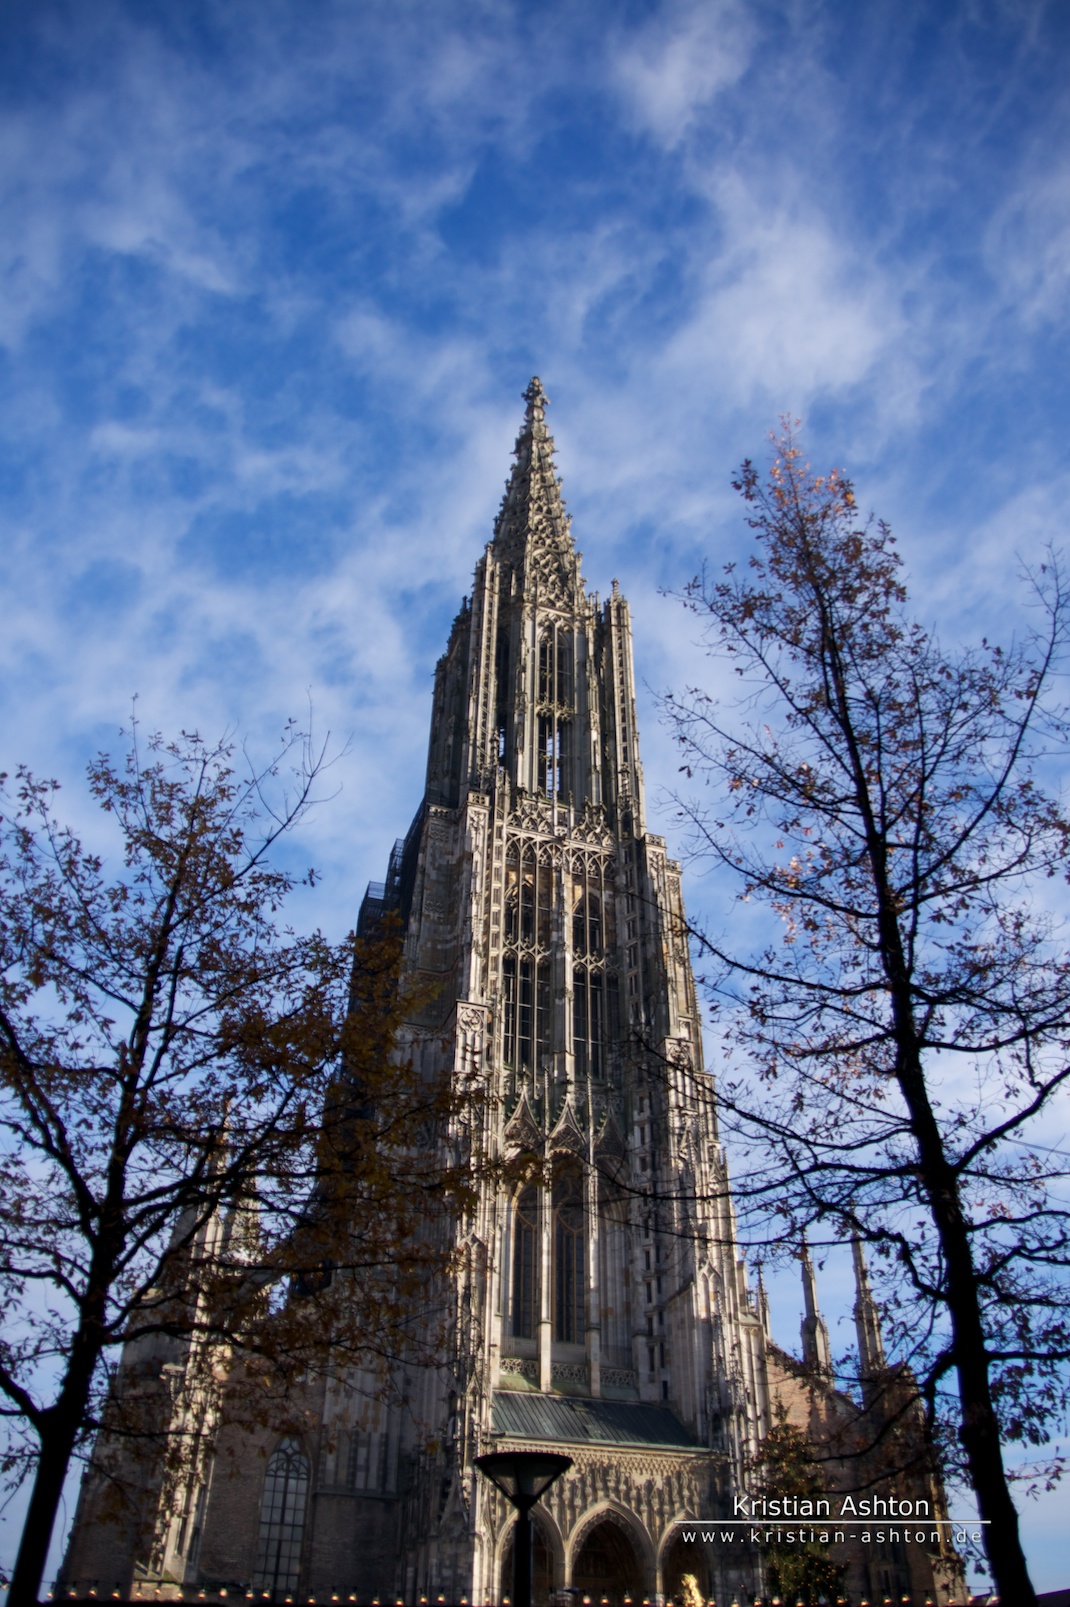 The minster in Ulm with the world's tallest church tower